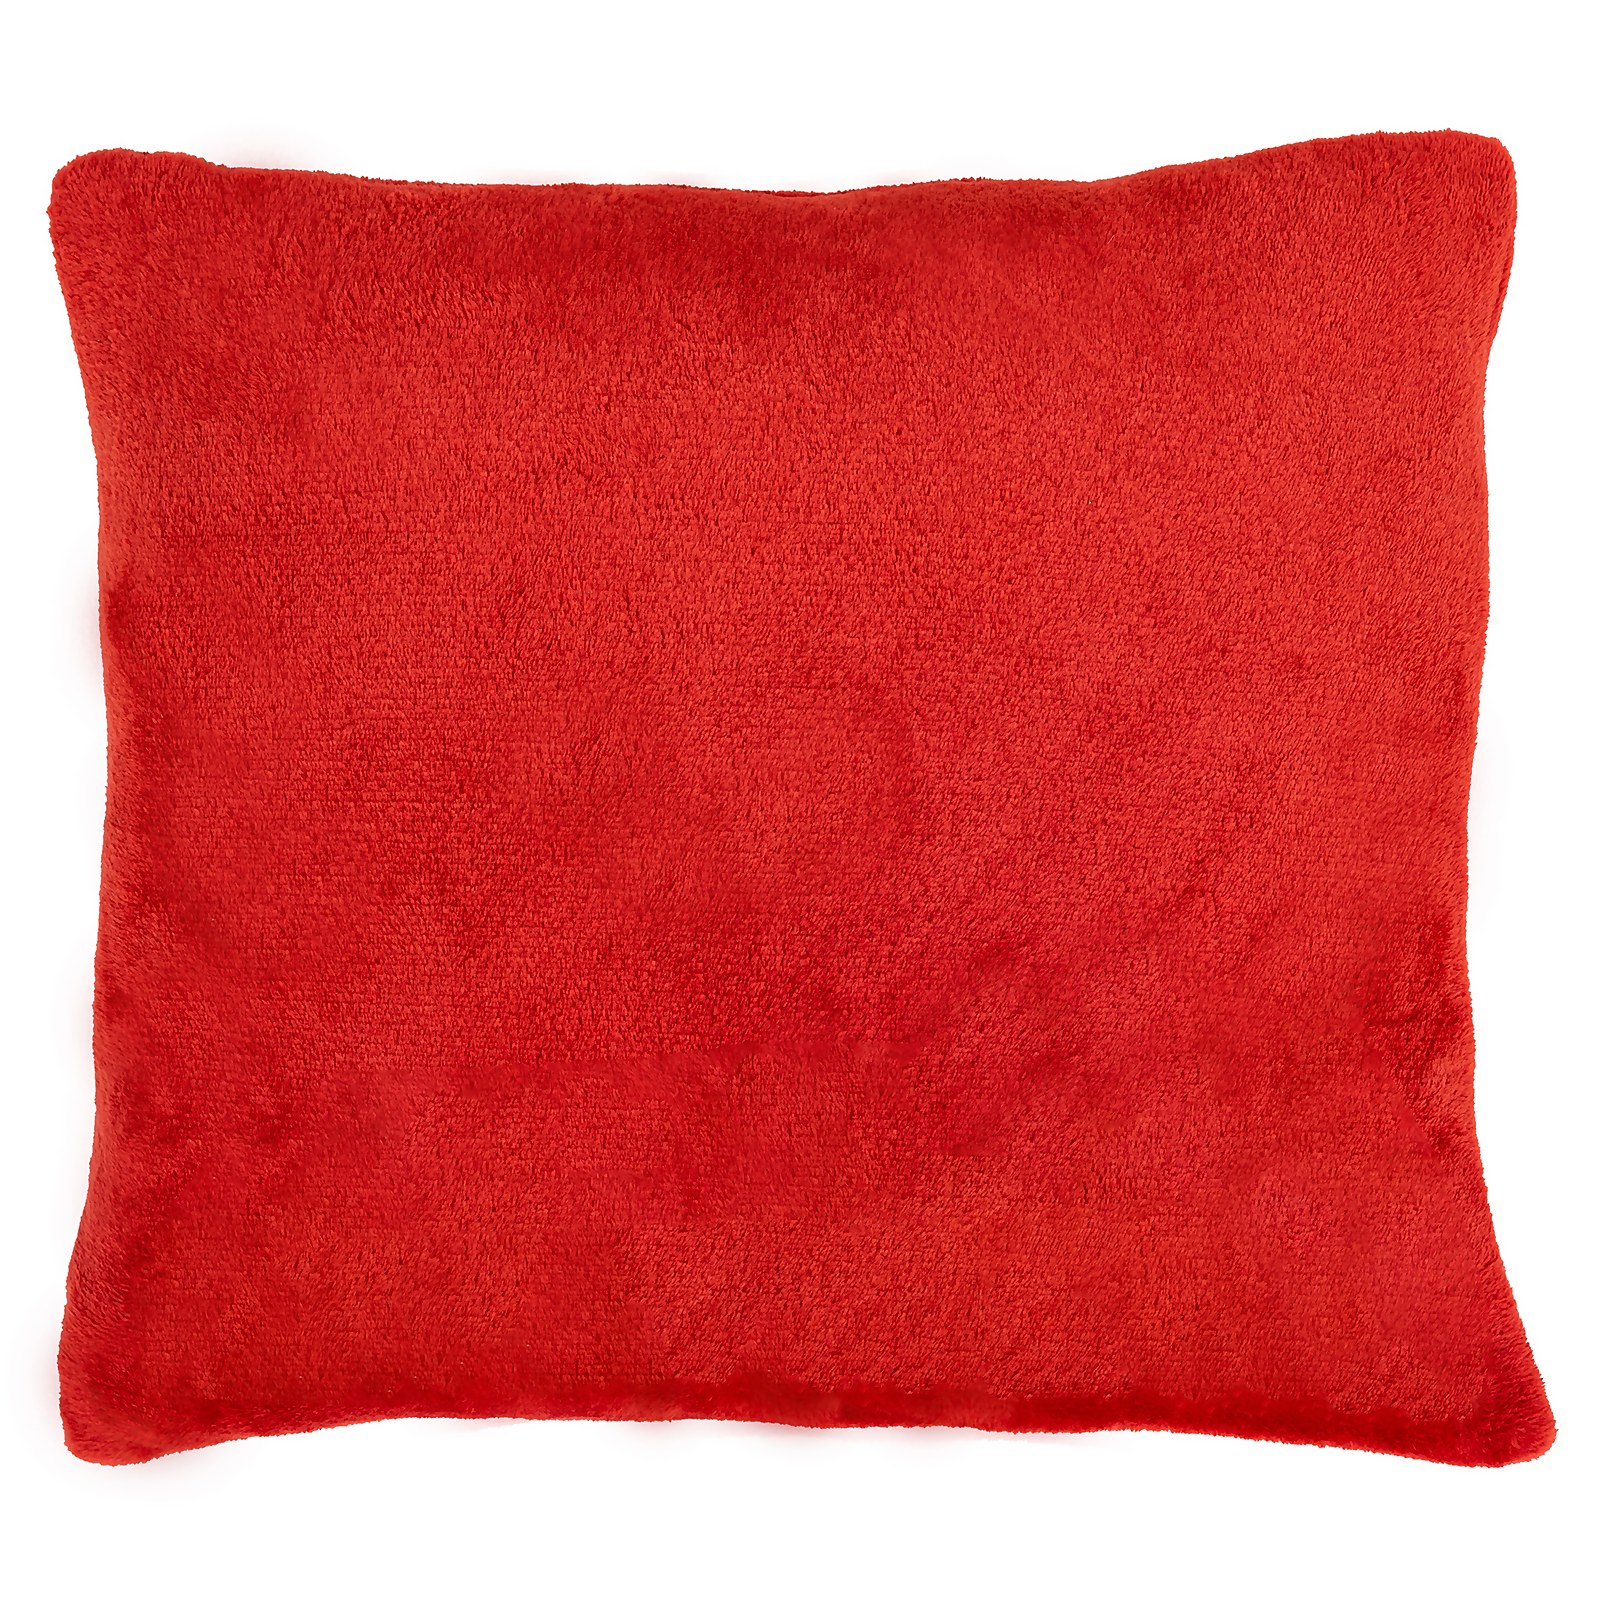 Photo of Supersoft Cushion - Red - 43x43cm